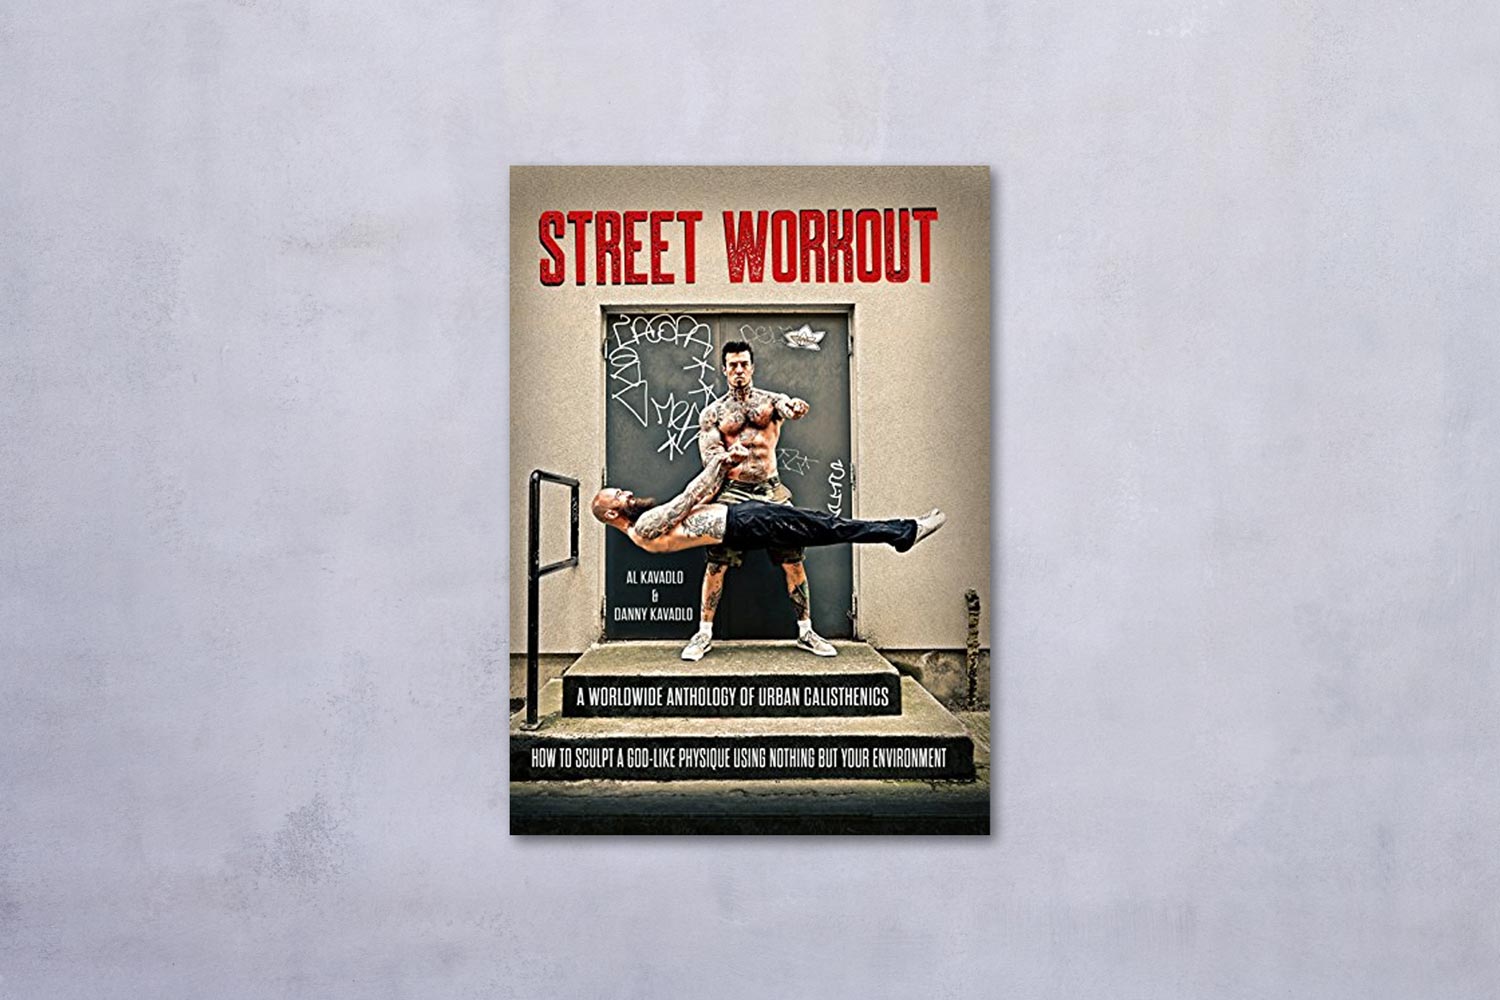 Street Workout by Al Kavadlo book cover